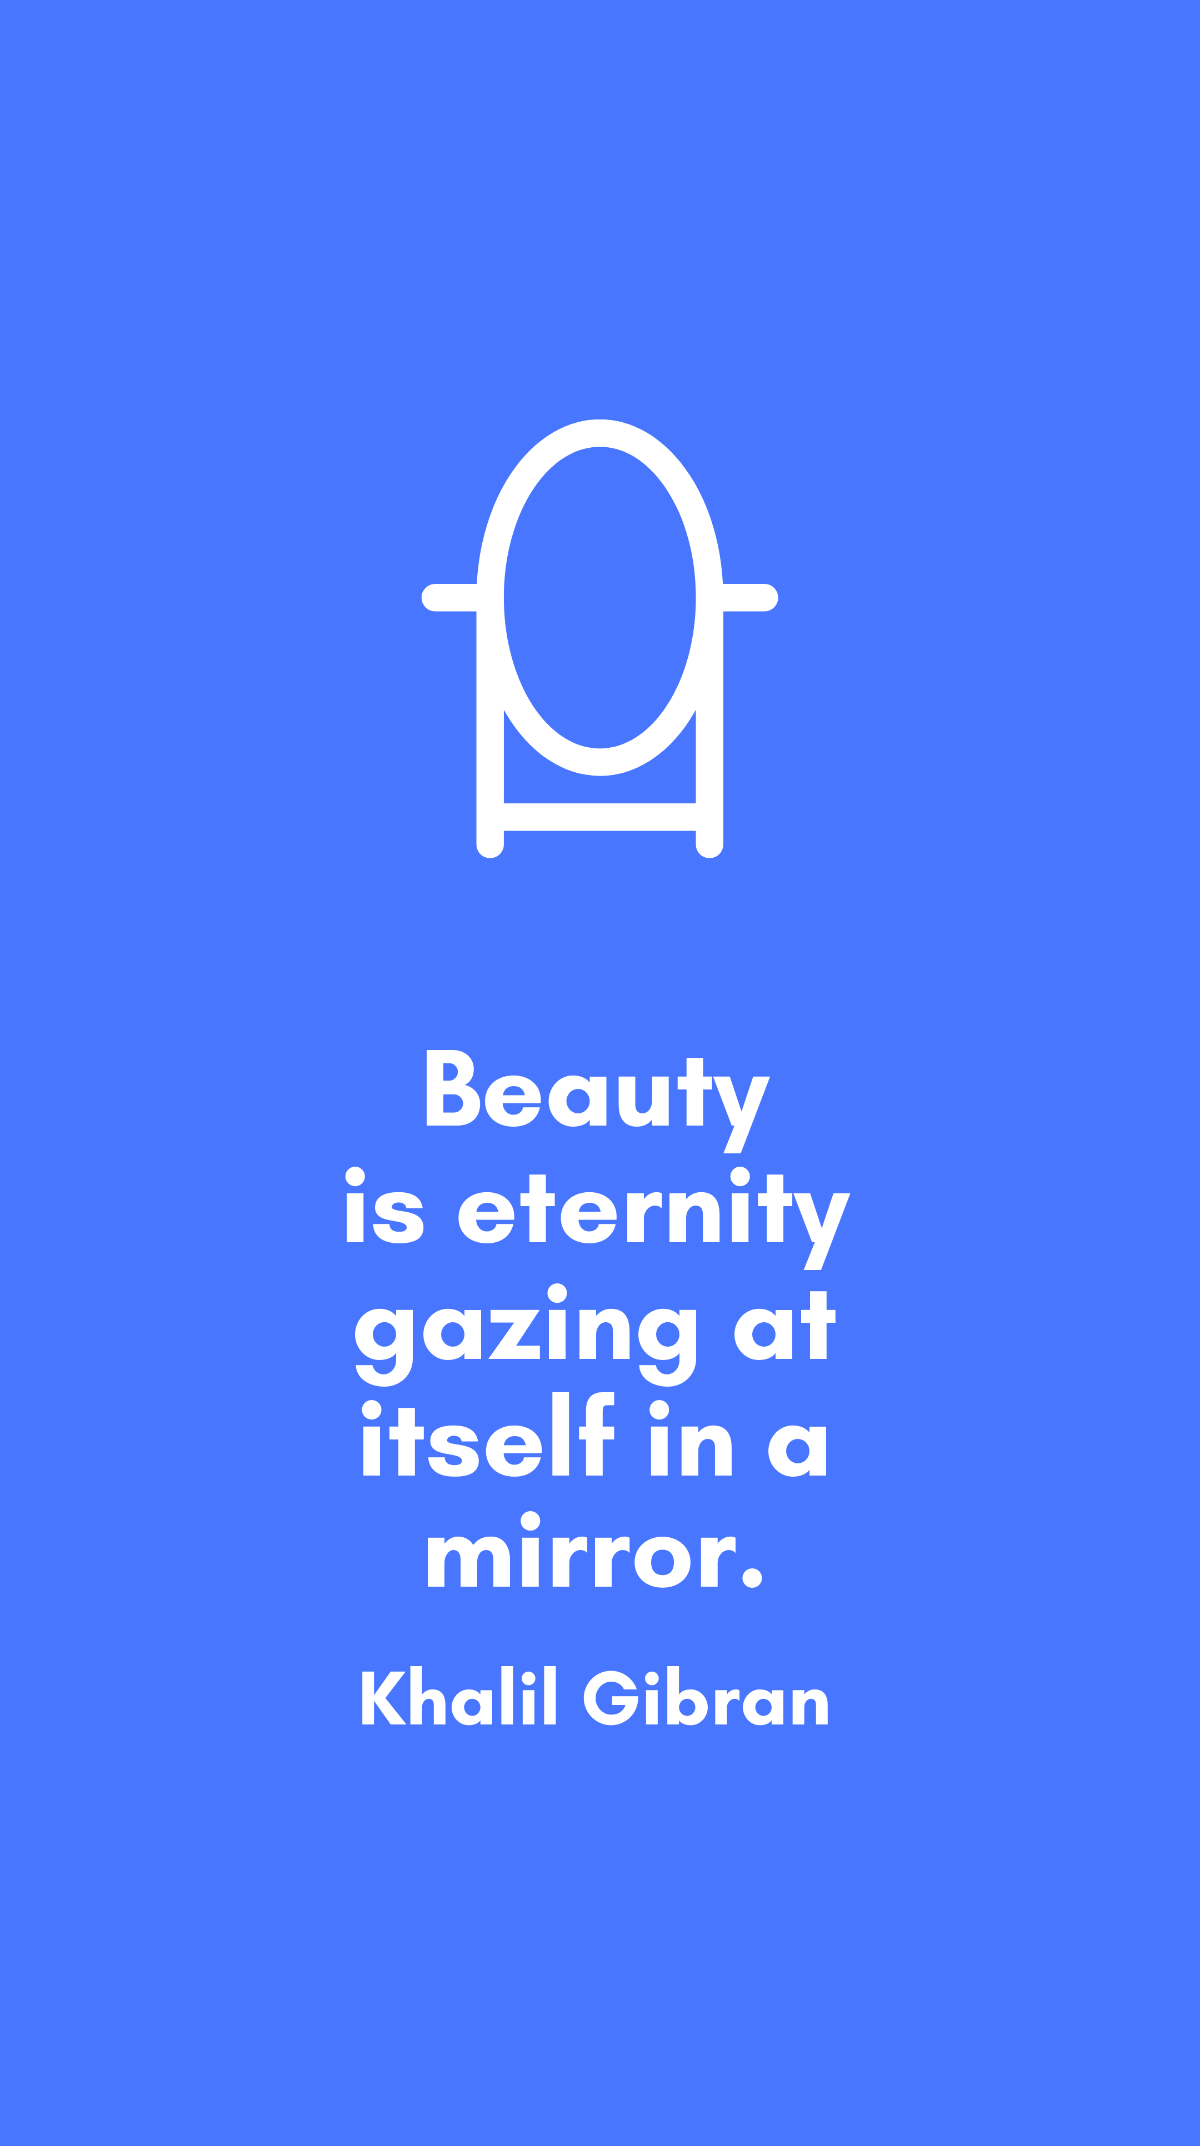 Khalil Gibran - Beauty is eternity gazing at itself in a mirror. Template